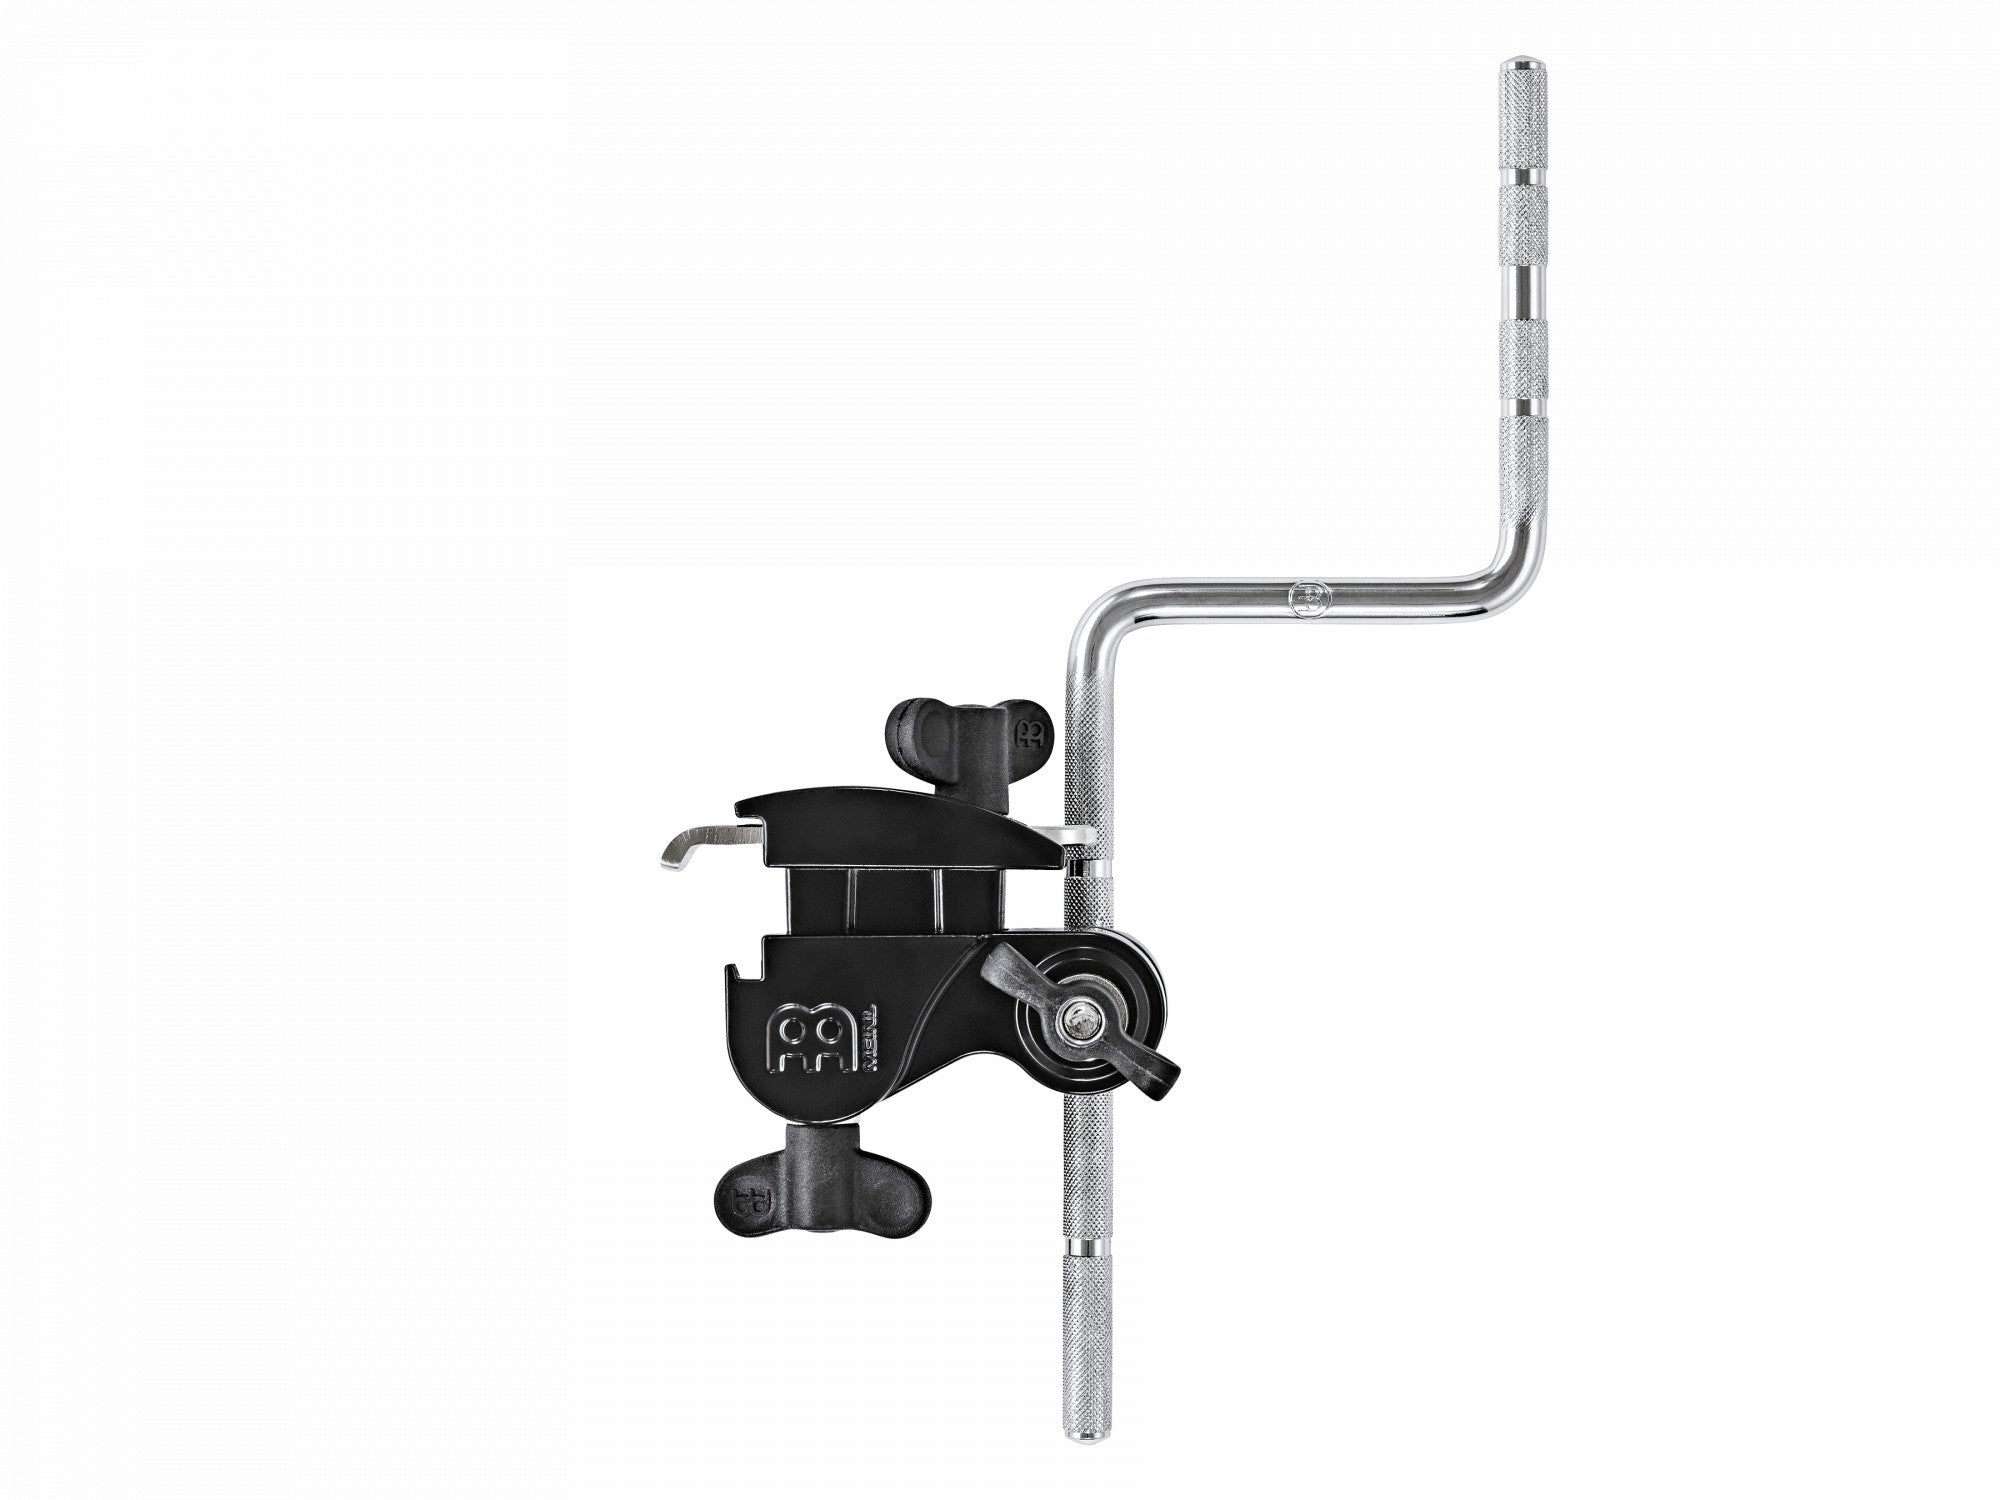 MEINL Percussion Professional Multi-Clamp with Z-shaped rod (TMPMC-R) clamp Meinl 